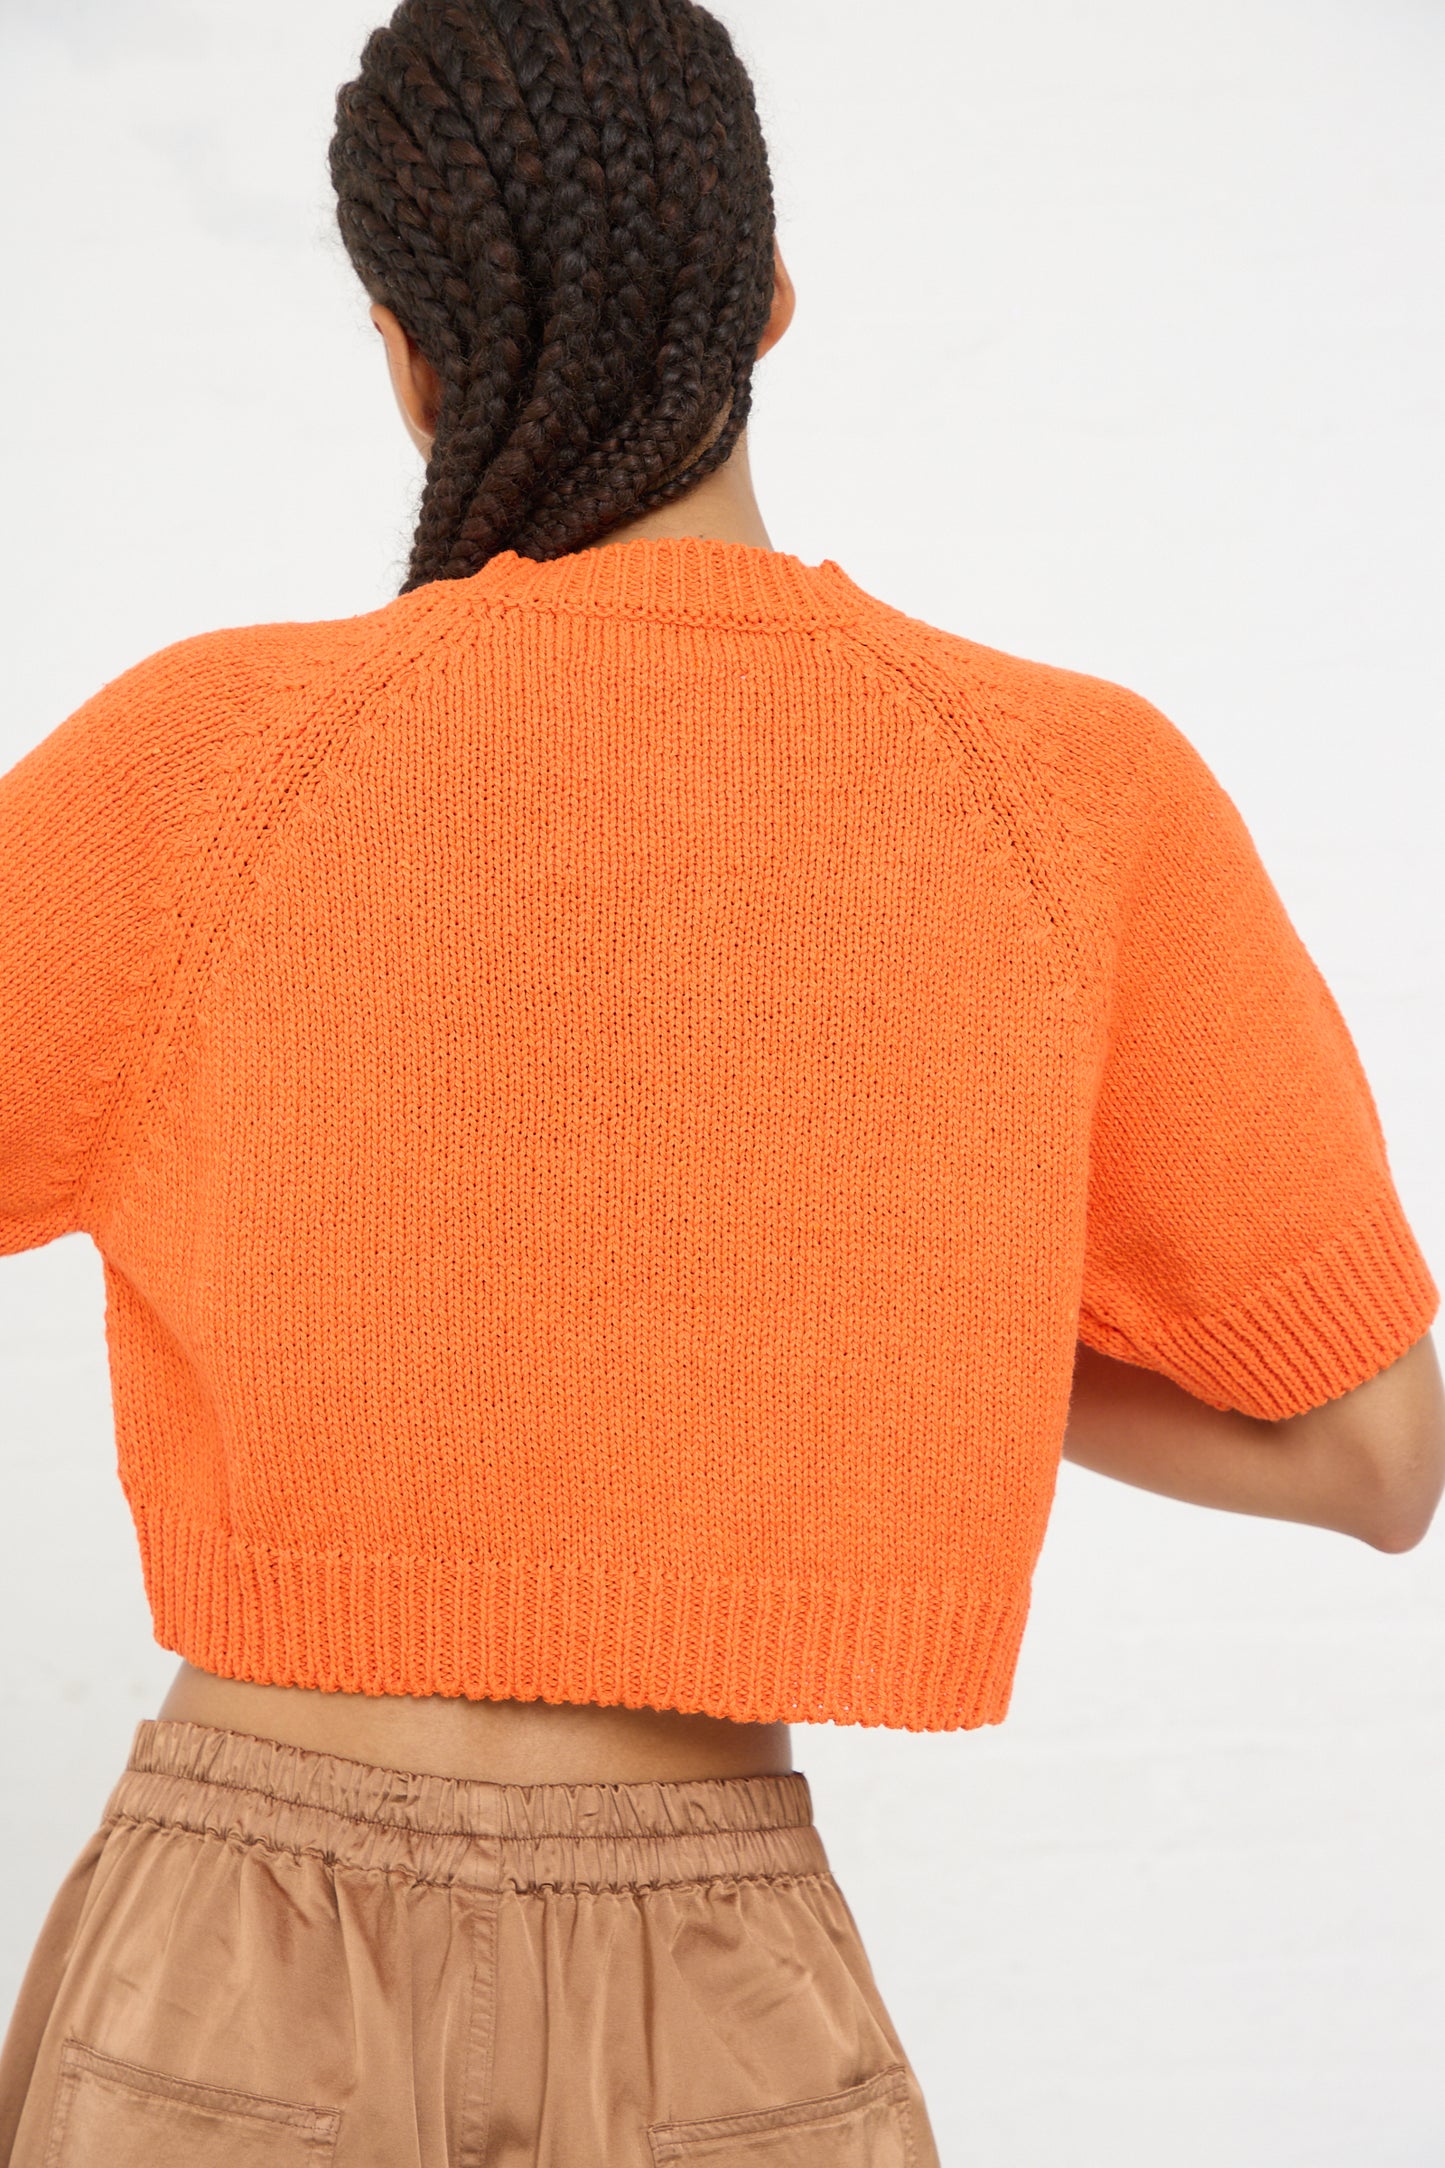 Woman from behind wearing a bright orange cropped, Cotton Knit Buttoned Top in Mandarina with beige trousers, sustainably made in Spain by Cordera.